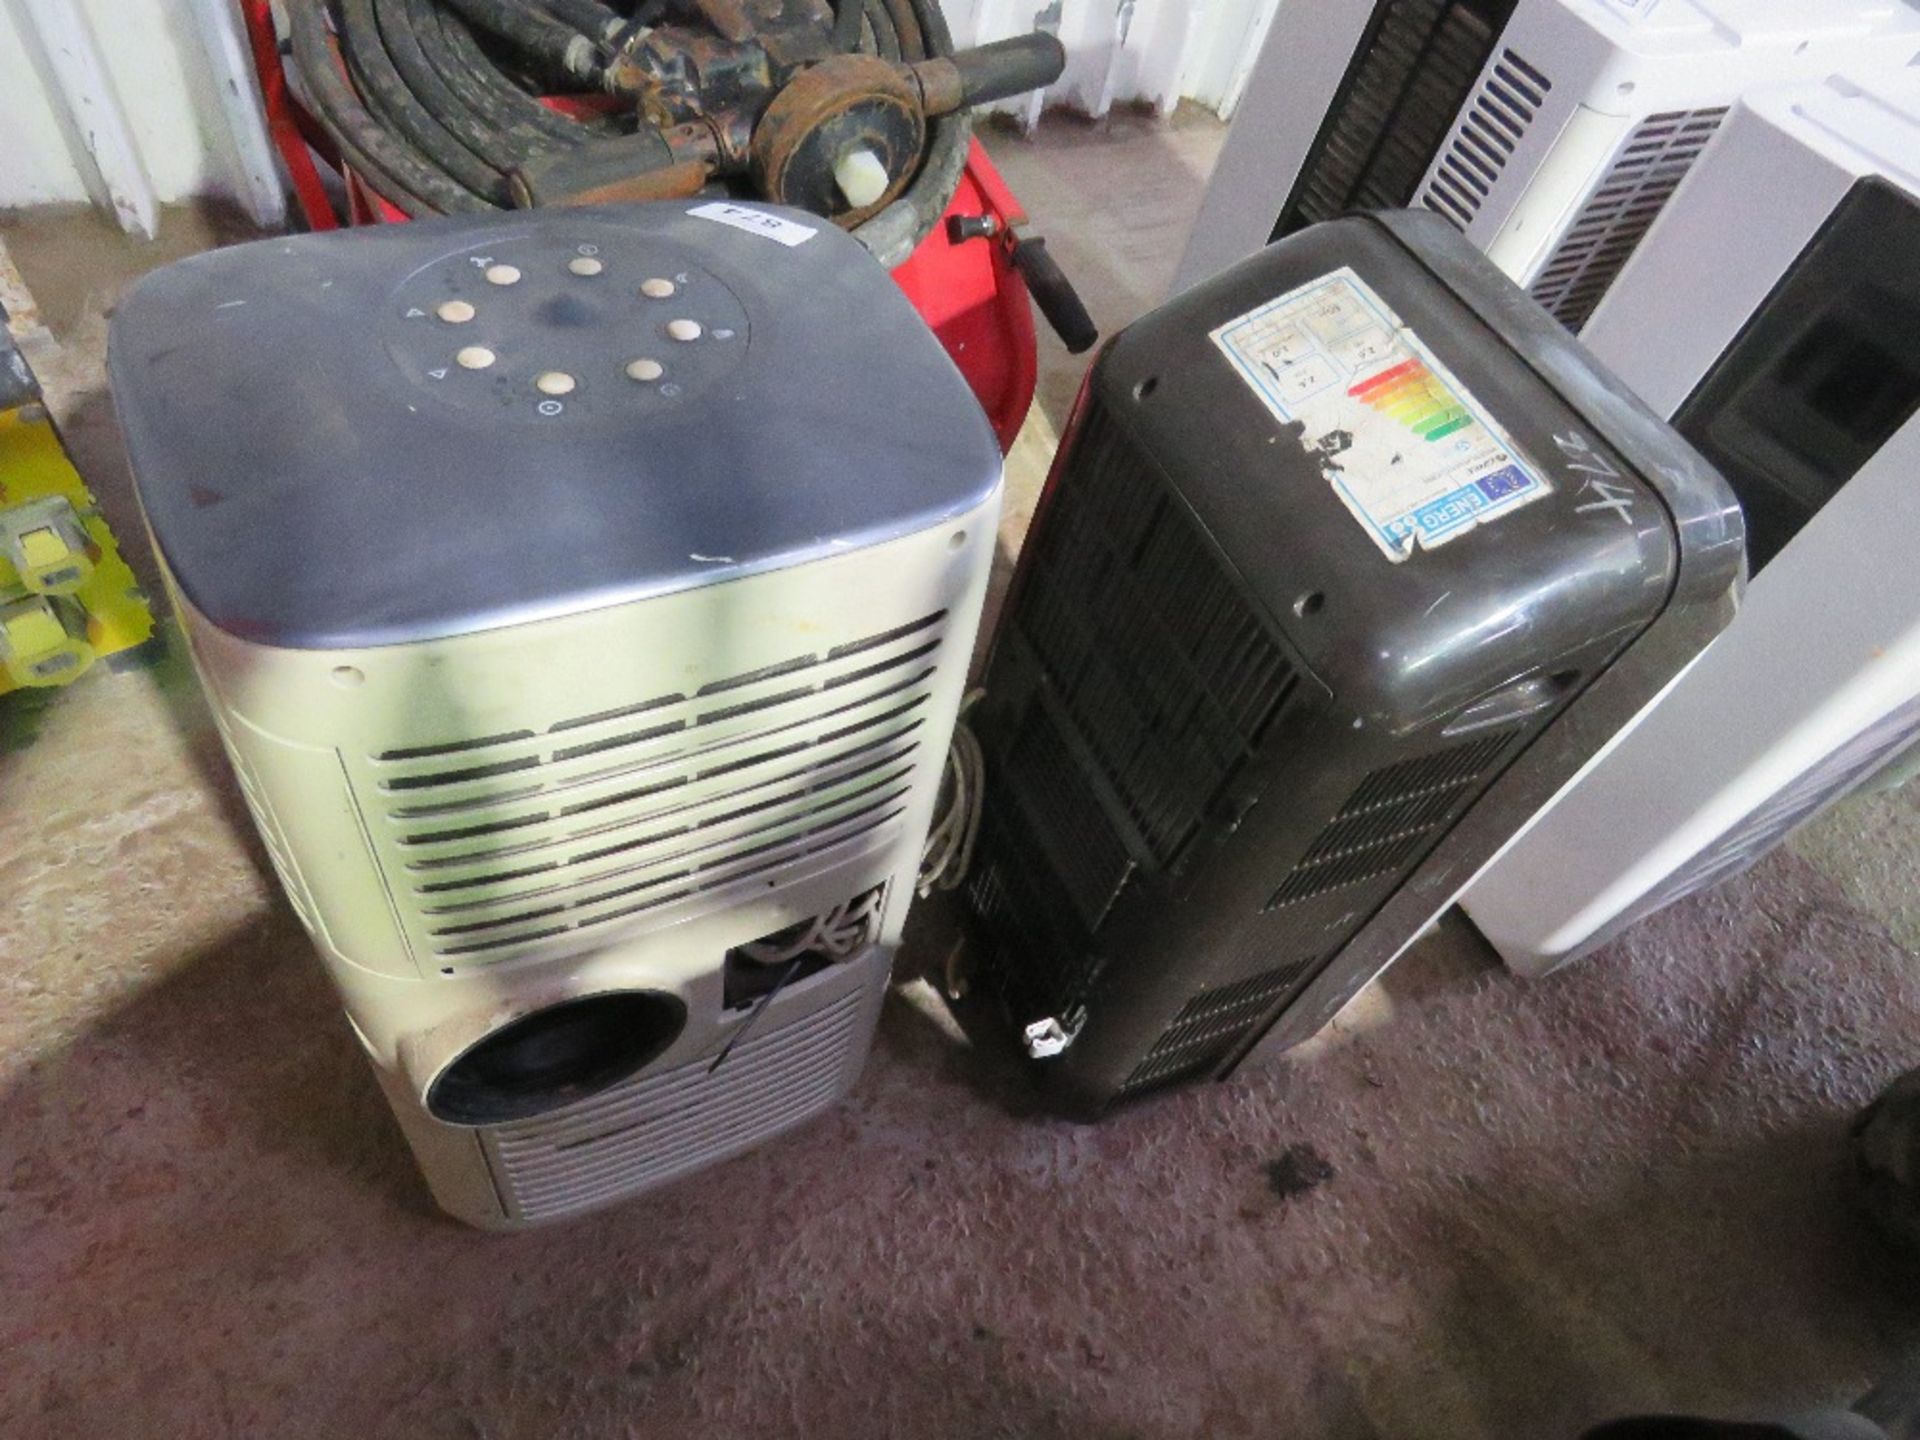 2 X ROOM AIR CONDITIONERS, 240VOLT POWERED. - Image 4 of 4